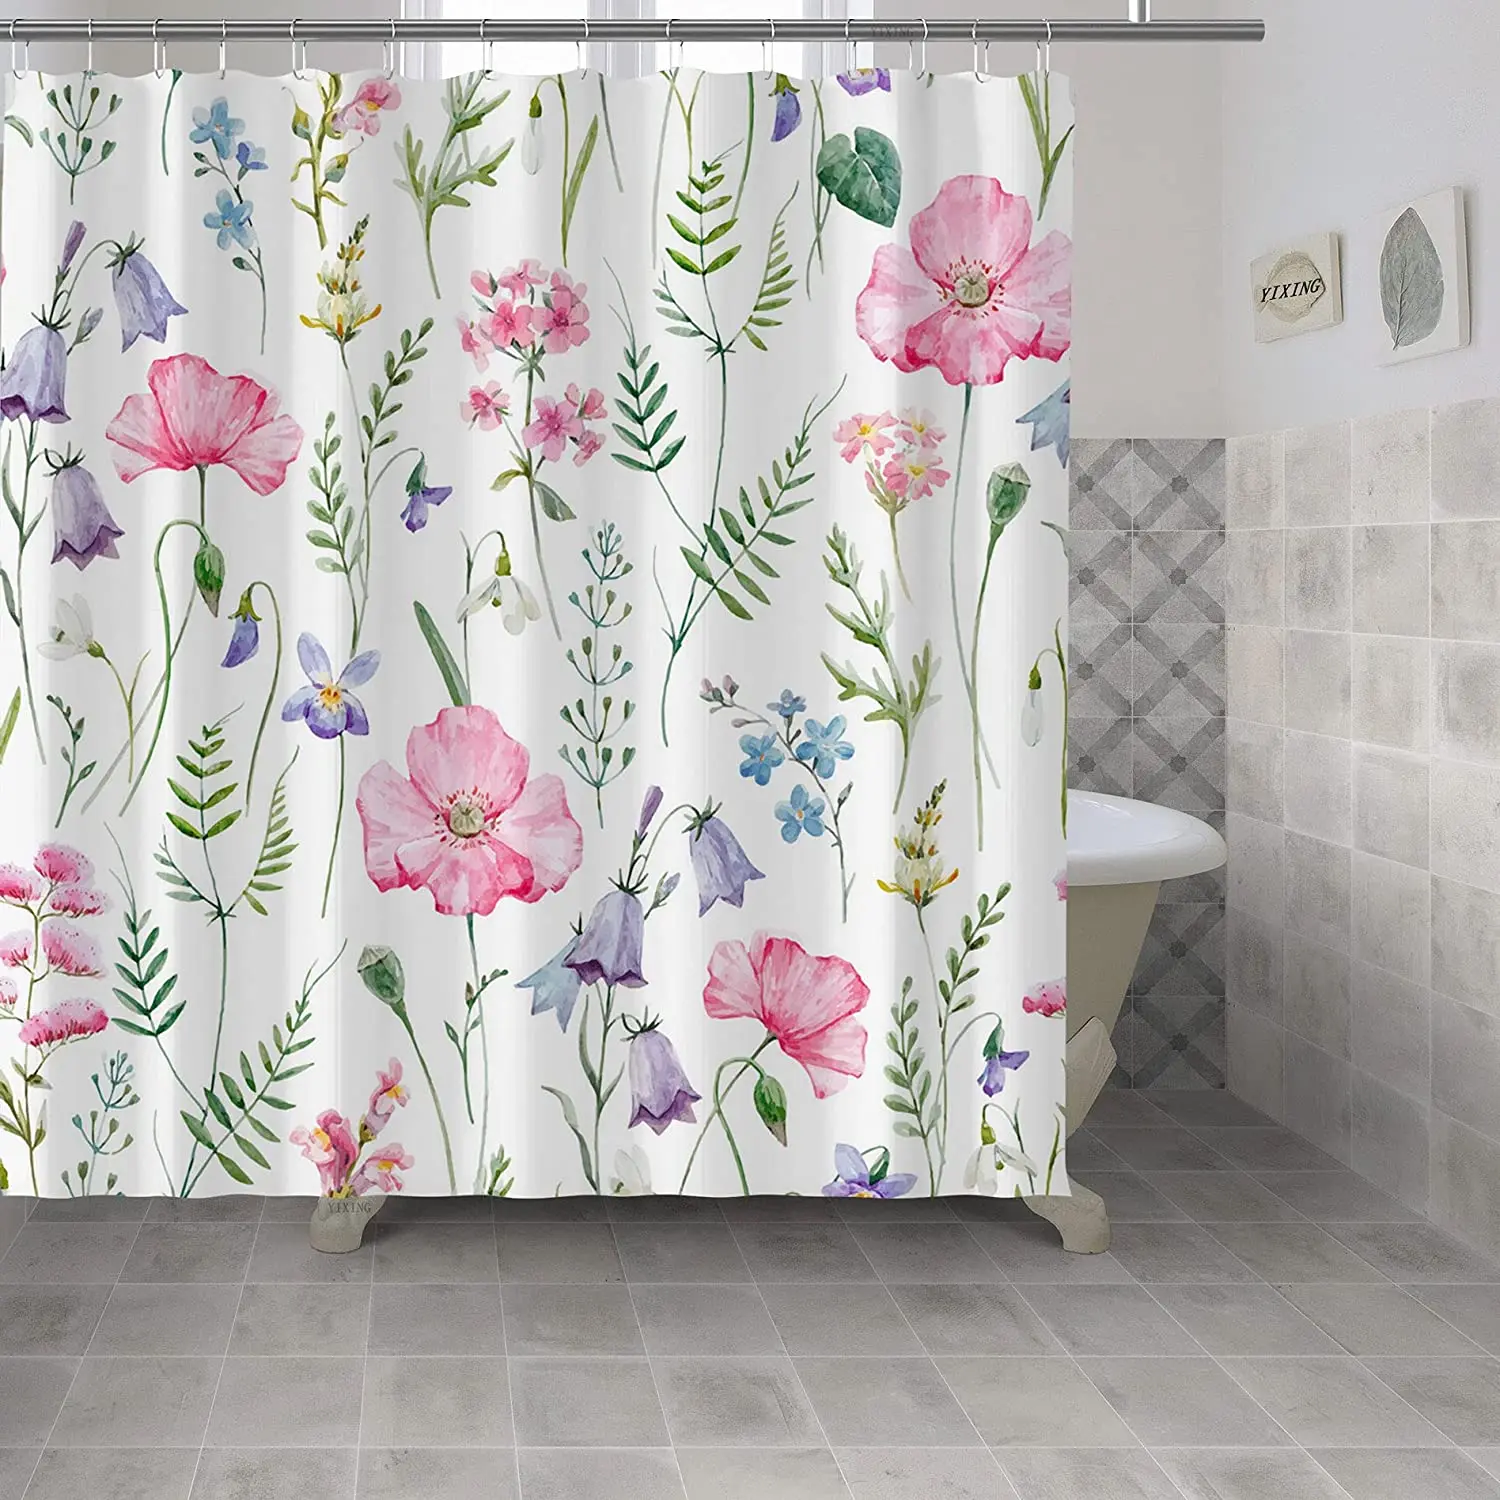 

Shower Curtain Watercolor Floral Pattern Delicate Flower Wildflowers Pink Tansy Pansies Waterproof Polyester Fabric Bathroom Set